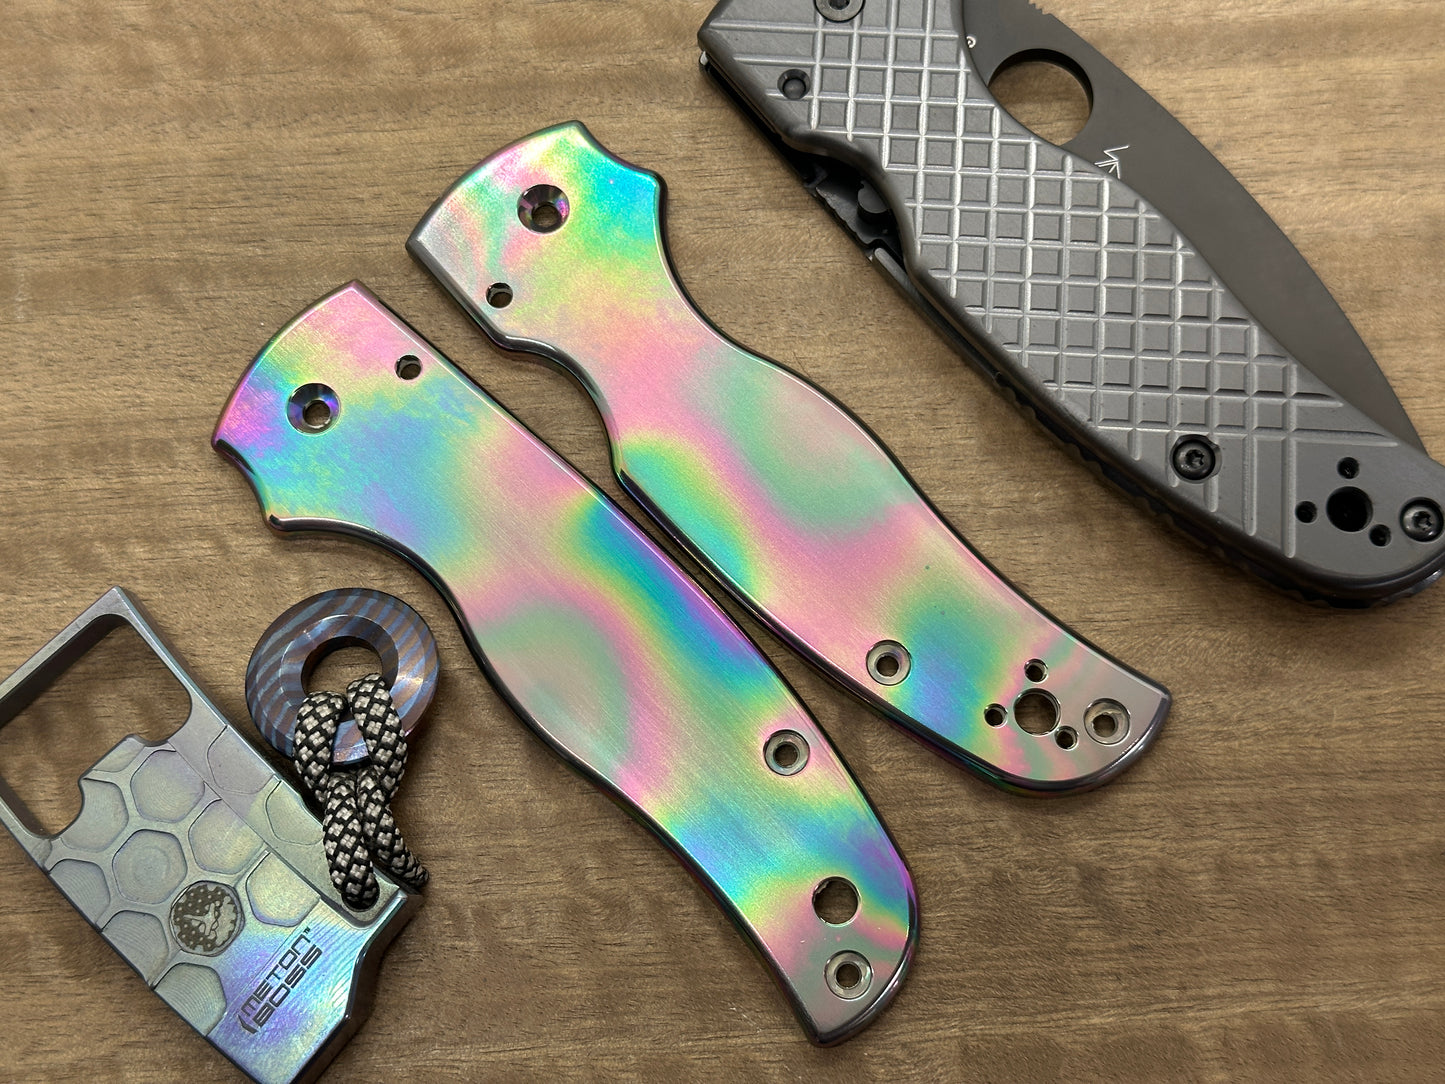 Oil Slick Polished Titanium Scales for SHAMAN Spyderco